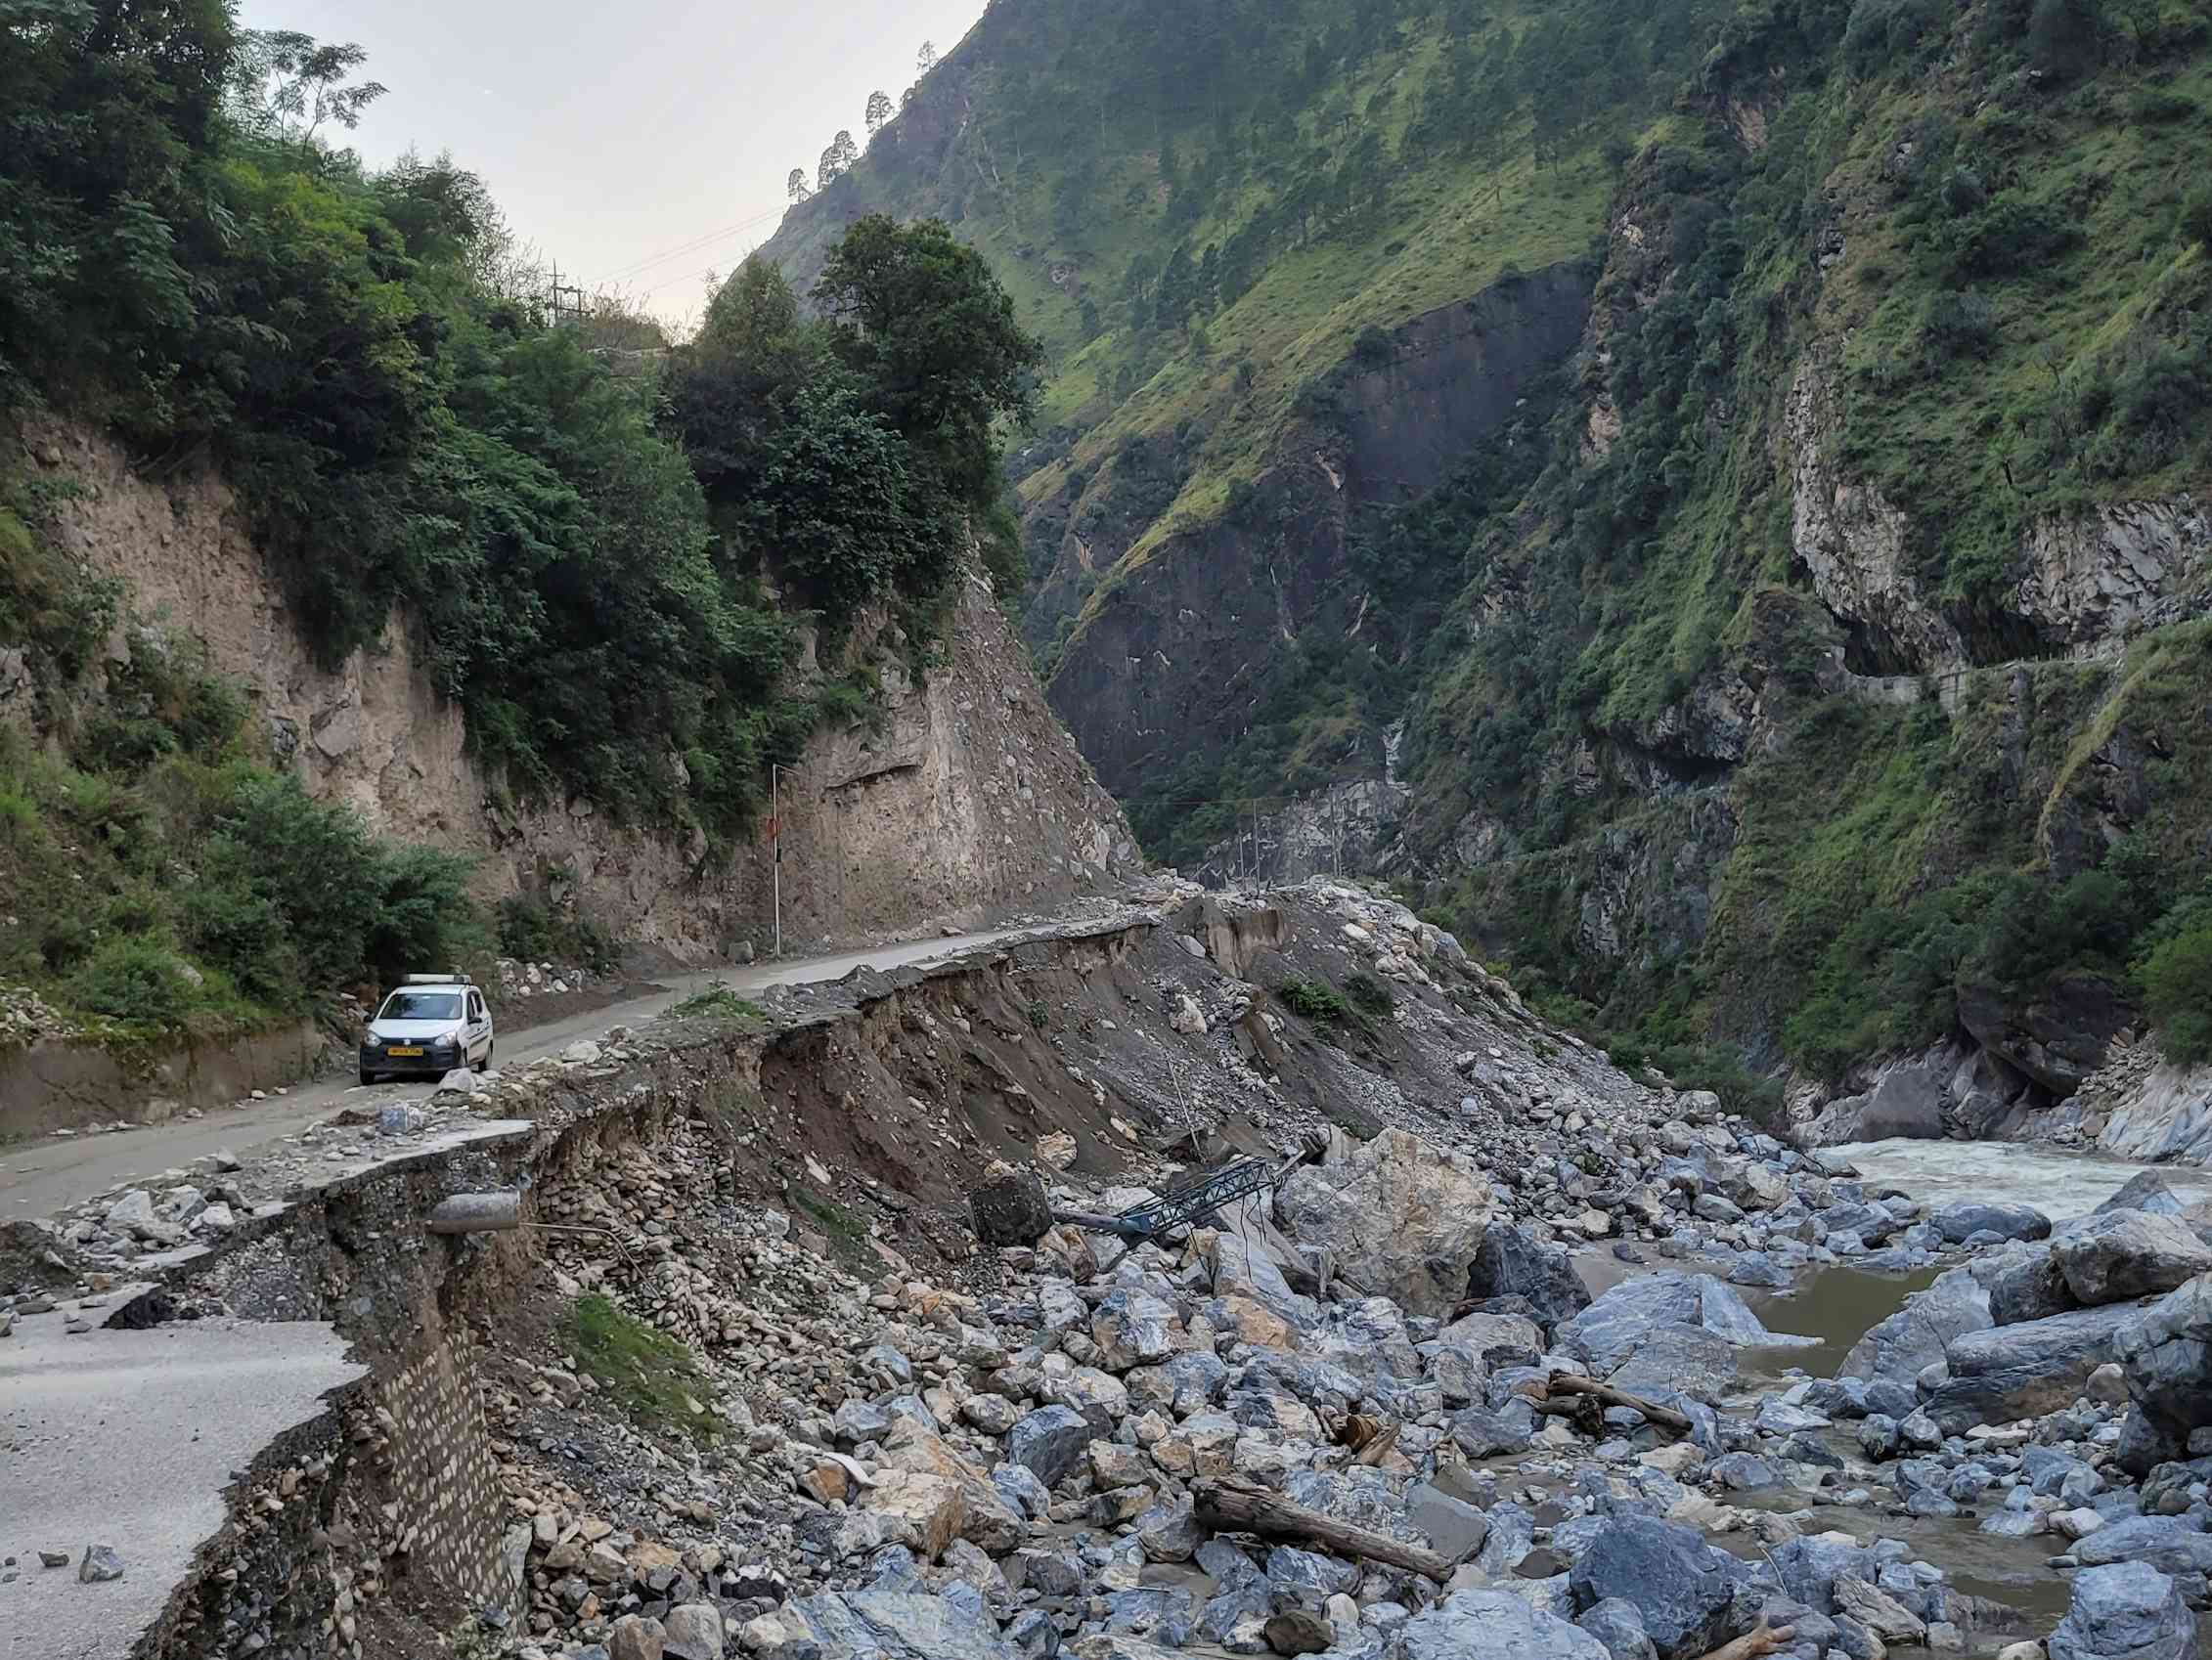 Himalayan communities are under siege from landslides – and climate change is worsening the crisis